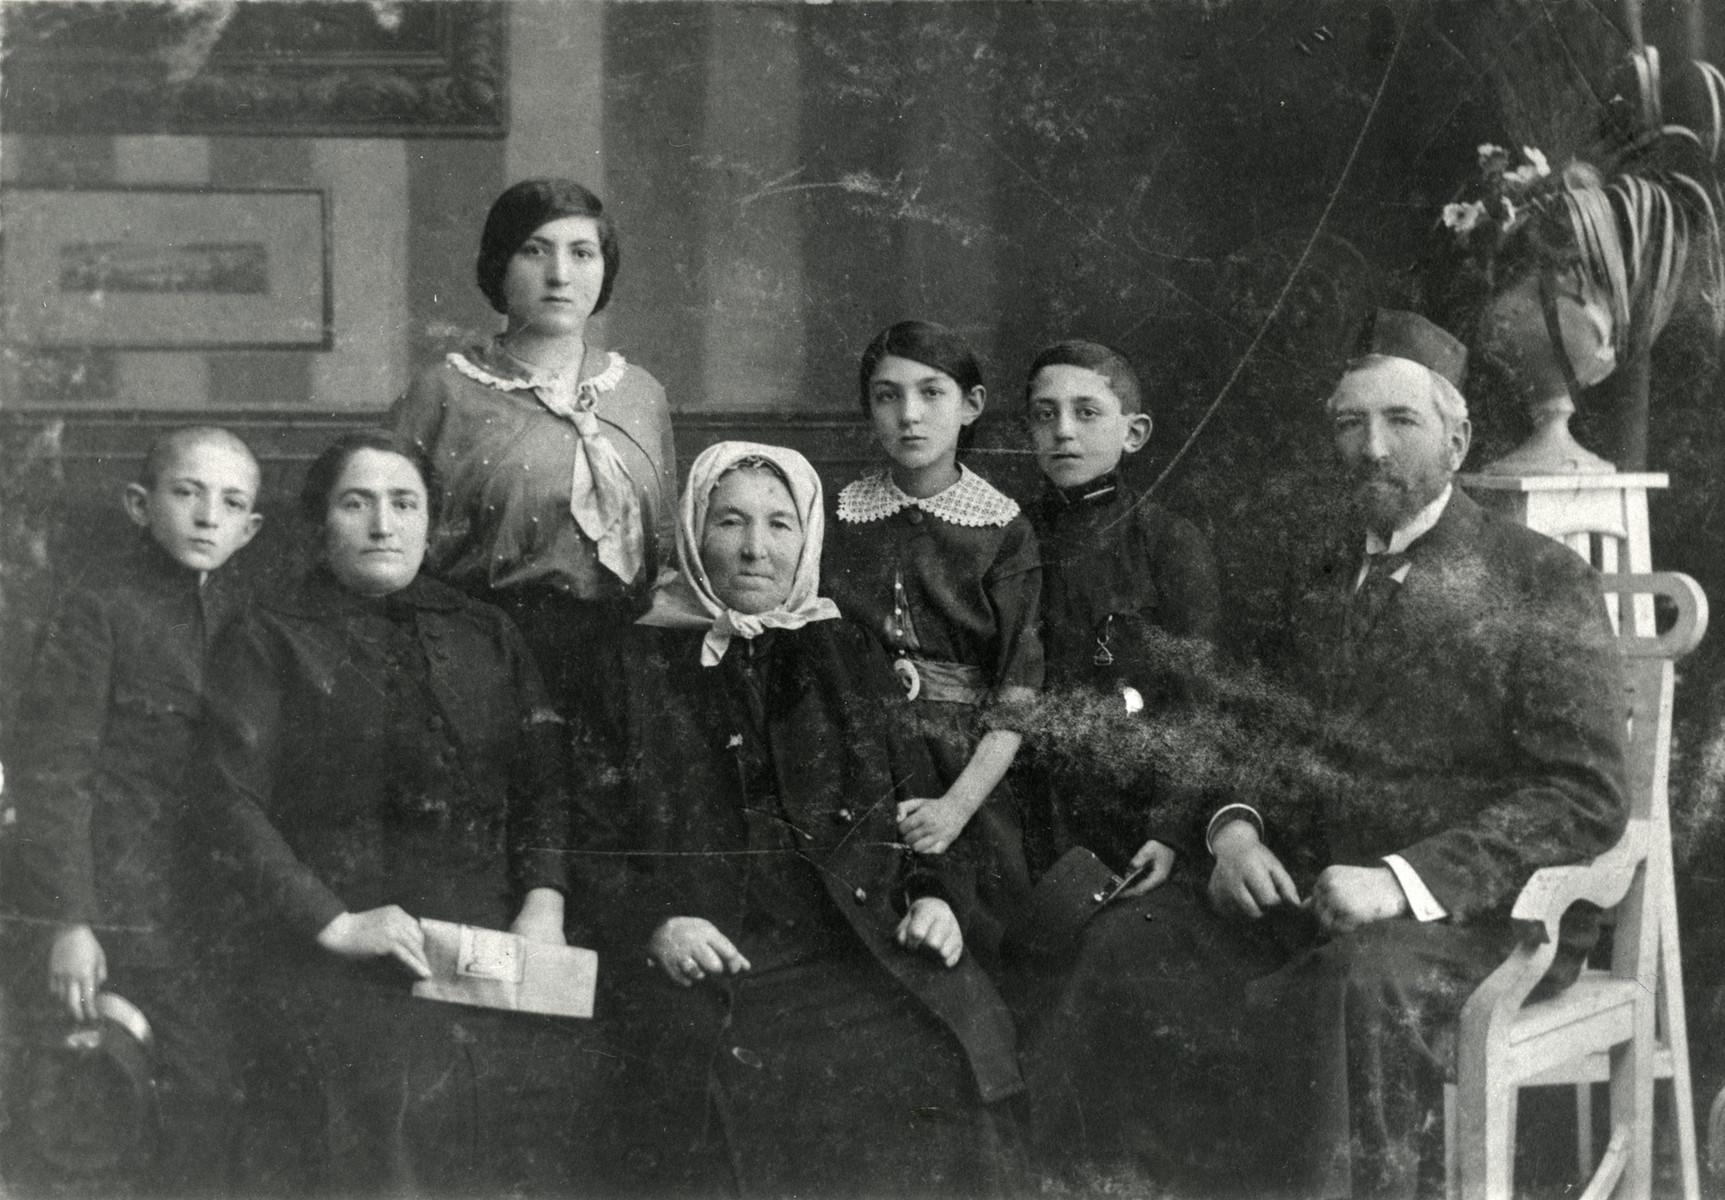 Studio portrait of the Weiselberg family.

After the father Nahum Weiselberg died in a typhus epidemic, his wife Ettel moved to Vienna.  Two children, Salo and Sala immigrated to Palestine.  Another son David became a doctor and immigrated to America.  The second daughter Paula is the mother of the donor.  The grandmother Ettel was deported to Theresienstadt and perished in the Holocaust.